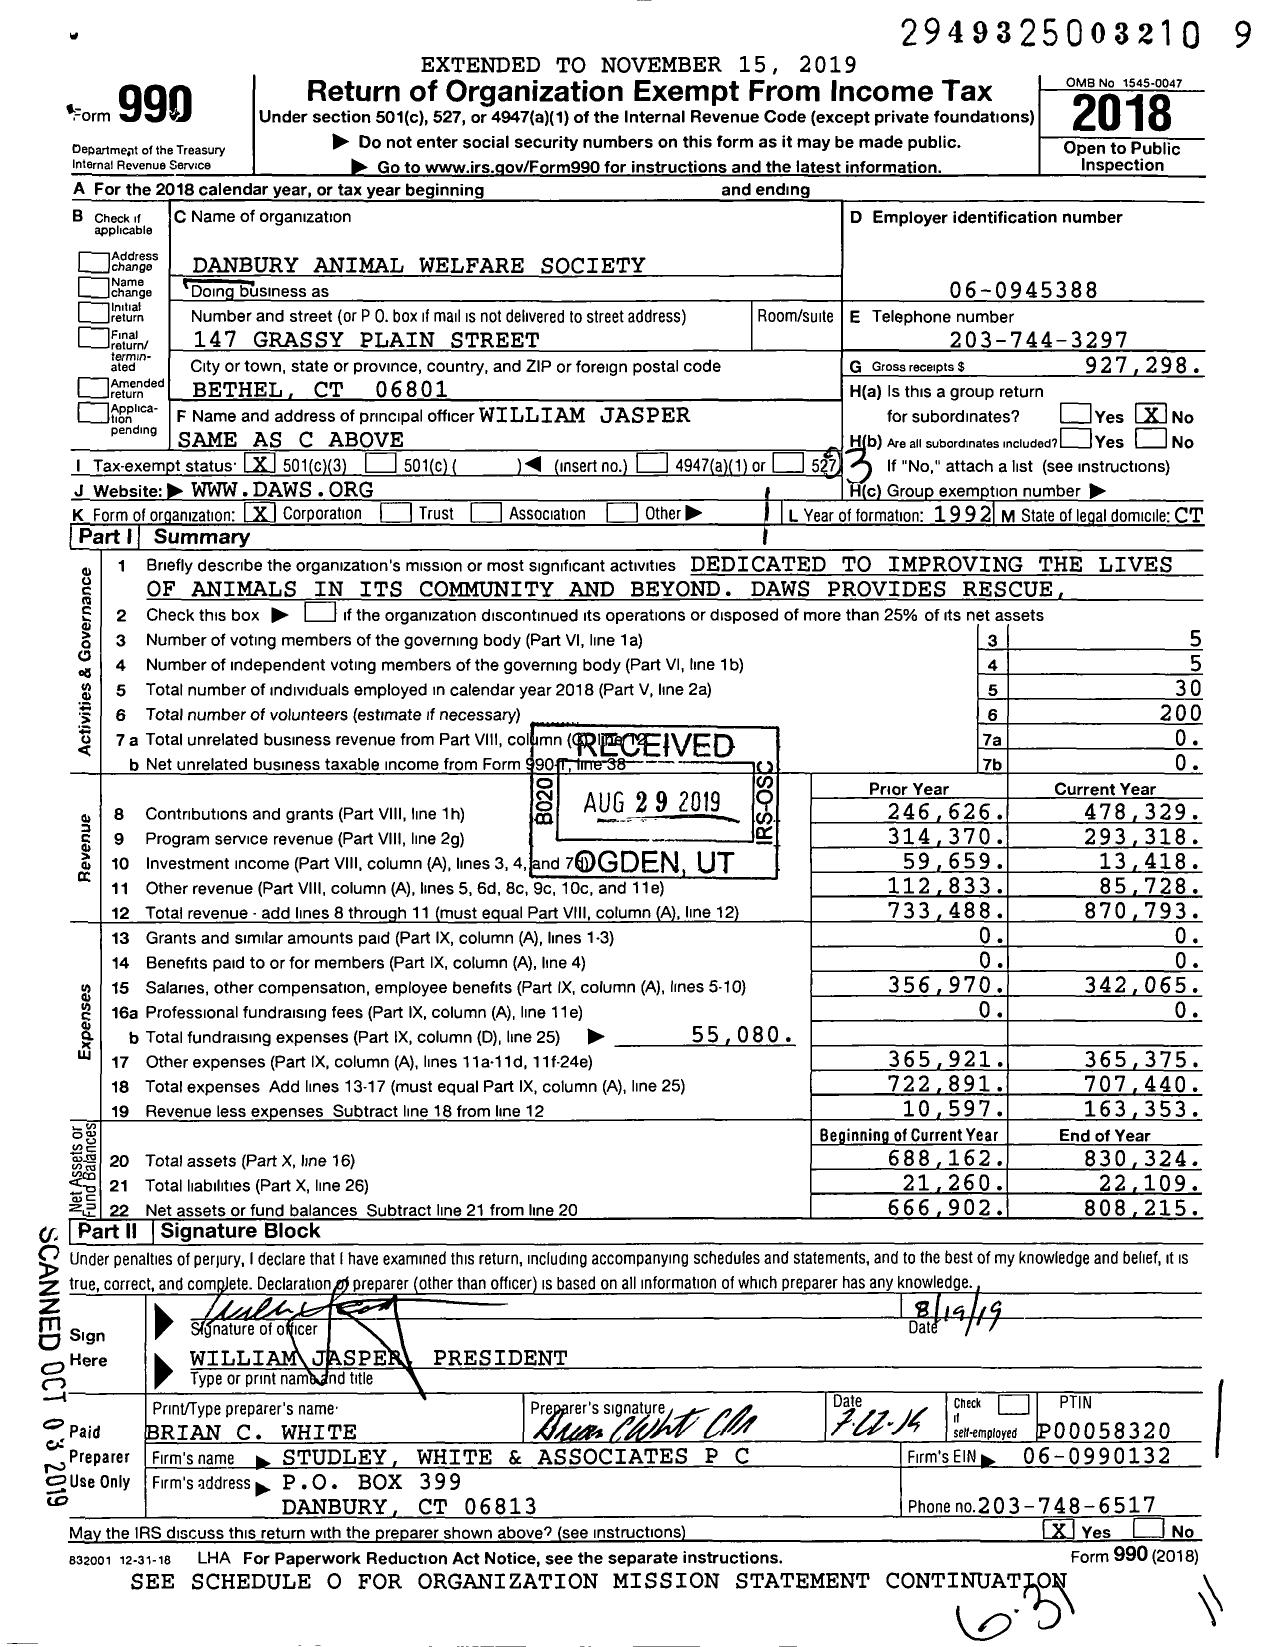 Image of first page of 2018 Form 990 for Danbury Animal Welfare Society (DAWS)